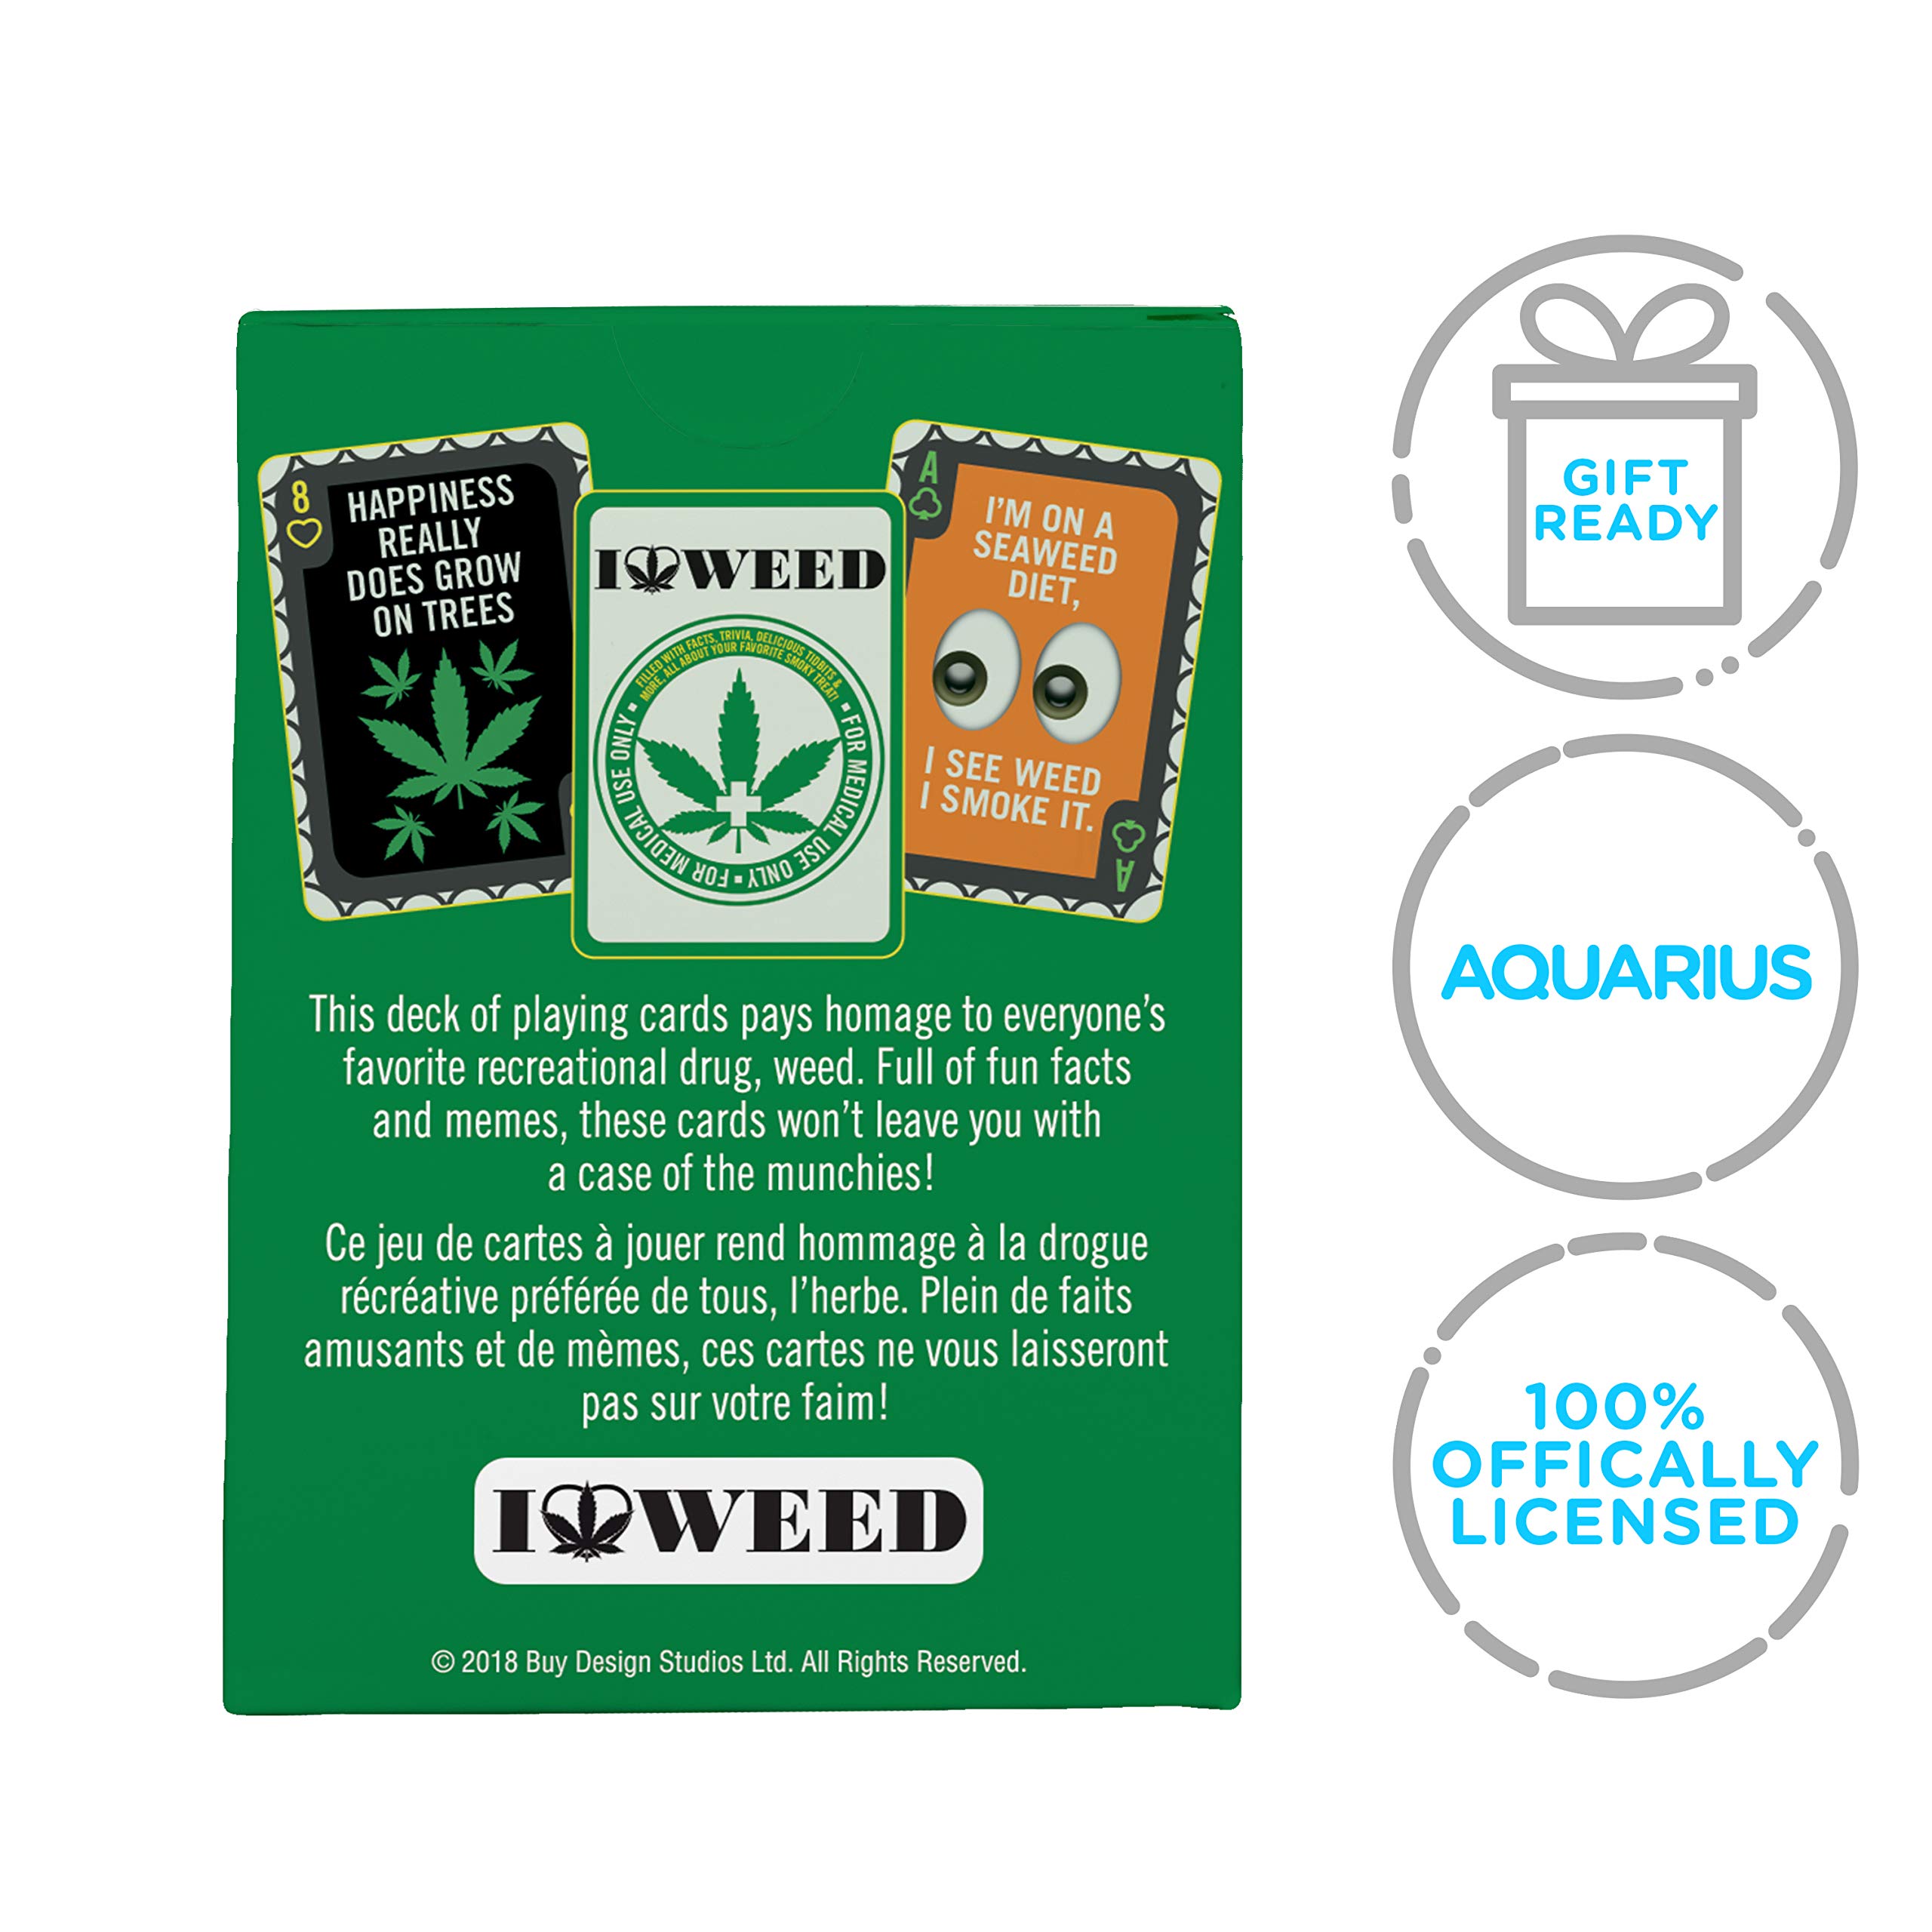 AQUARIUS Weed Playing Cards - Weed Themed Deck of Cards for Your Favorite Card Games - Weed Merchandise & Collectibles - Poker Size with Linen Finish